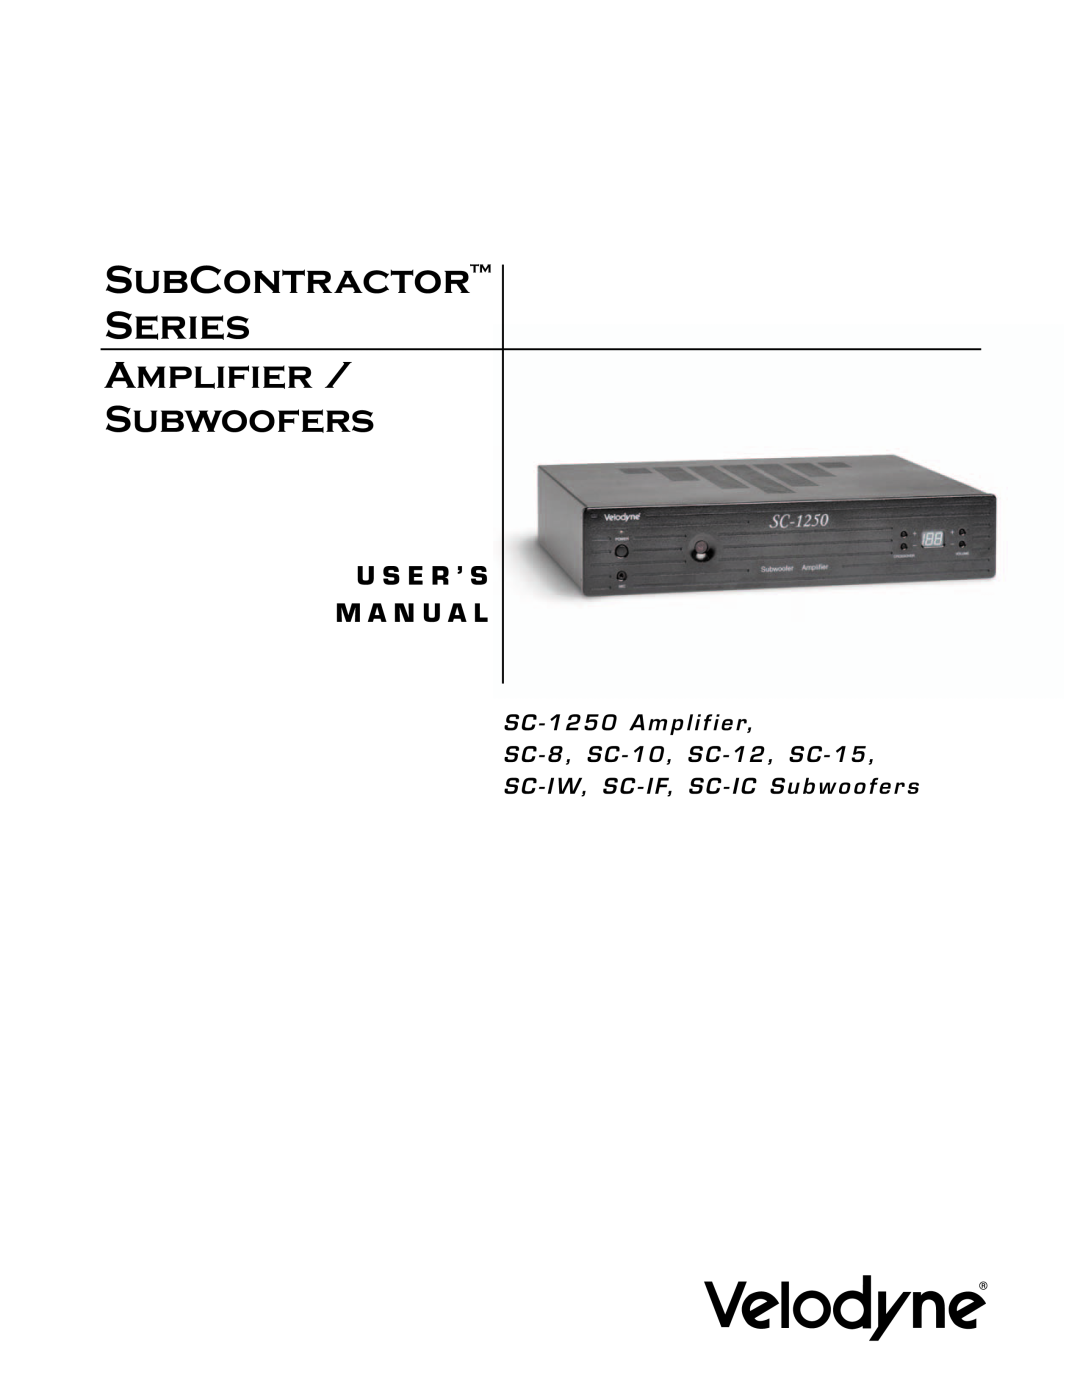 Velodyne Acoustics installation manual SC-IW In-WallSubwoofer, SubContractorTM Series 